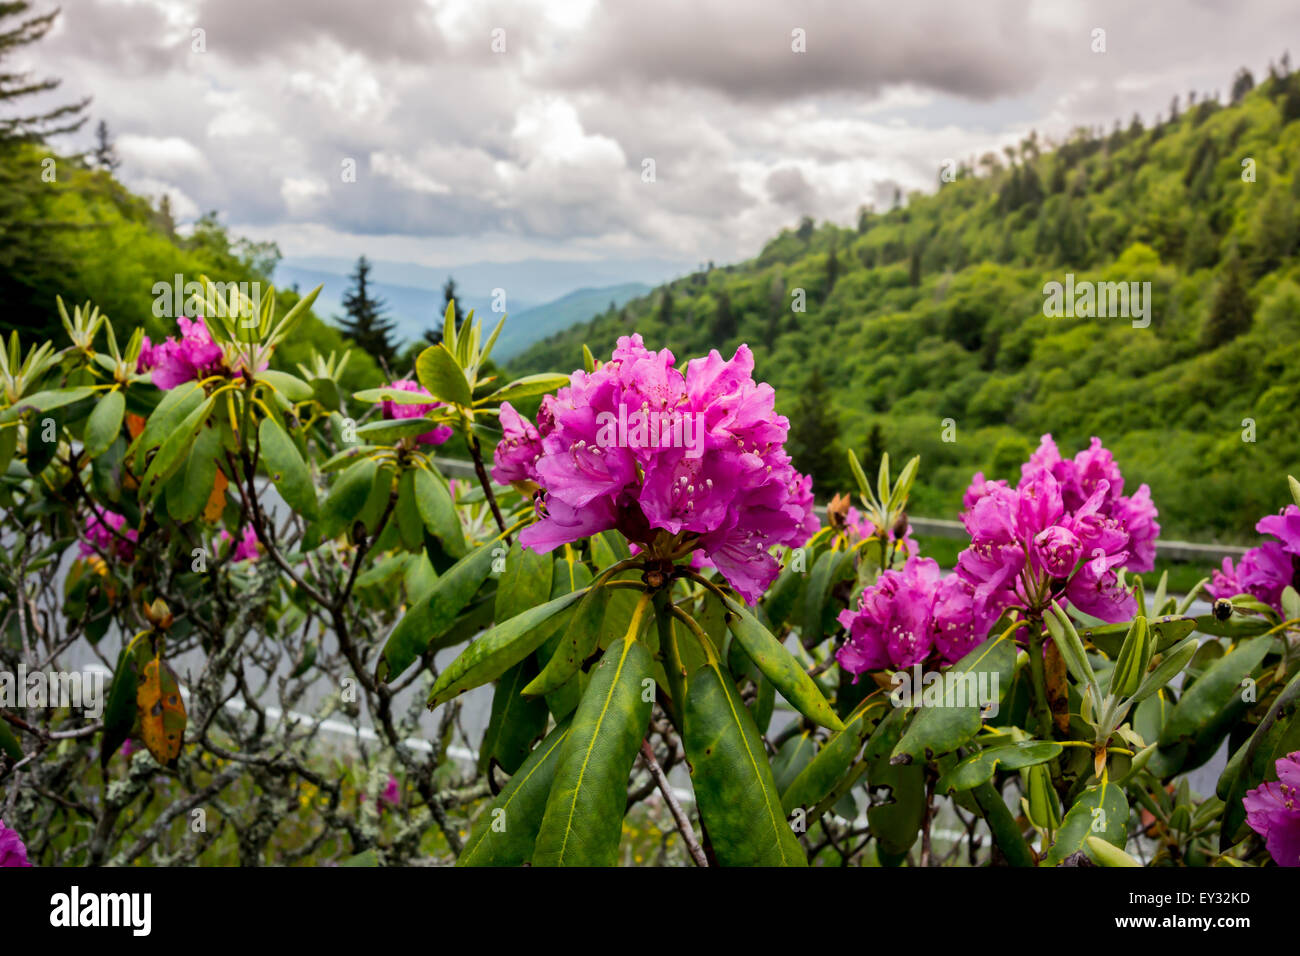 Brilliant purple rhododendron near the road that runs through Great Smoky Mountain National Park Stock Photo